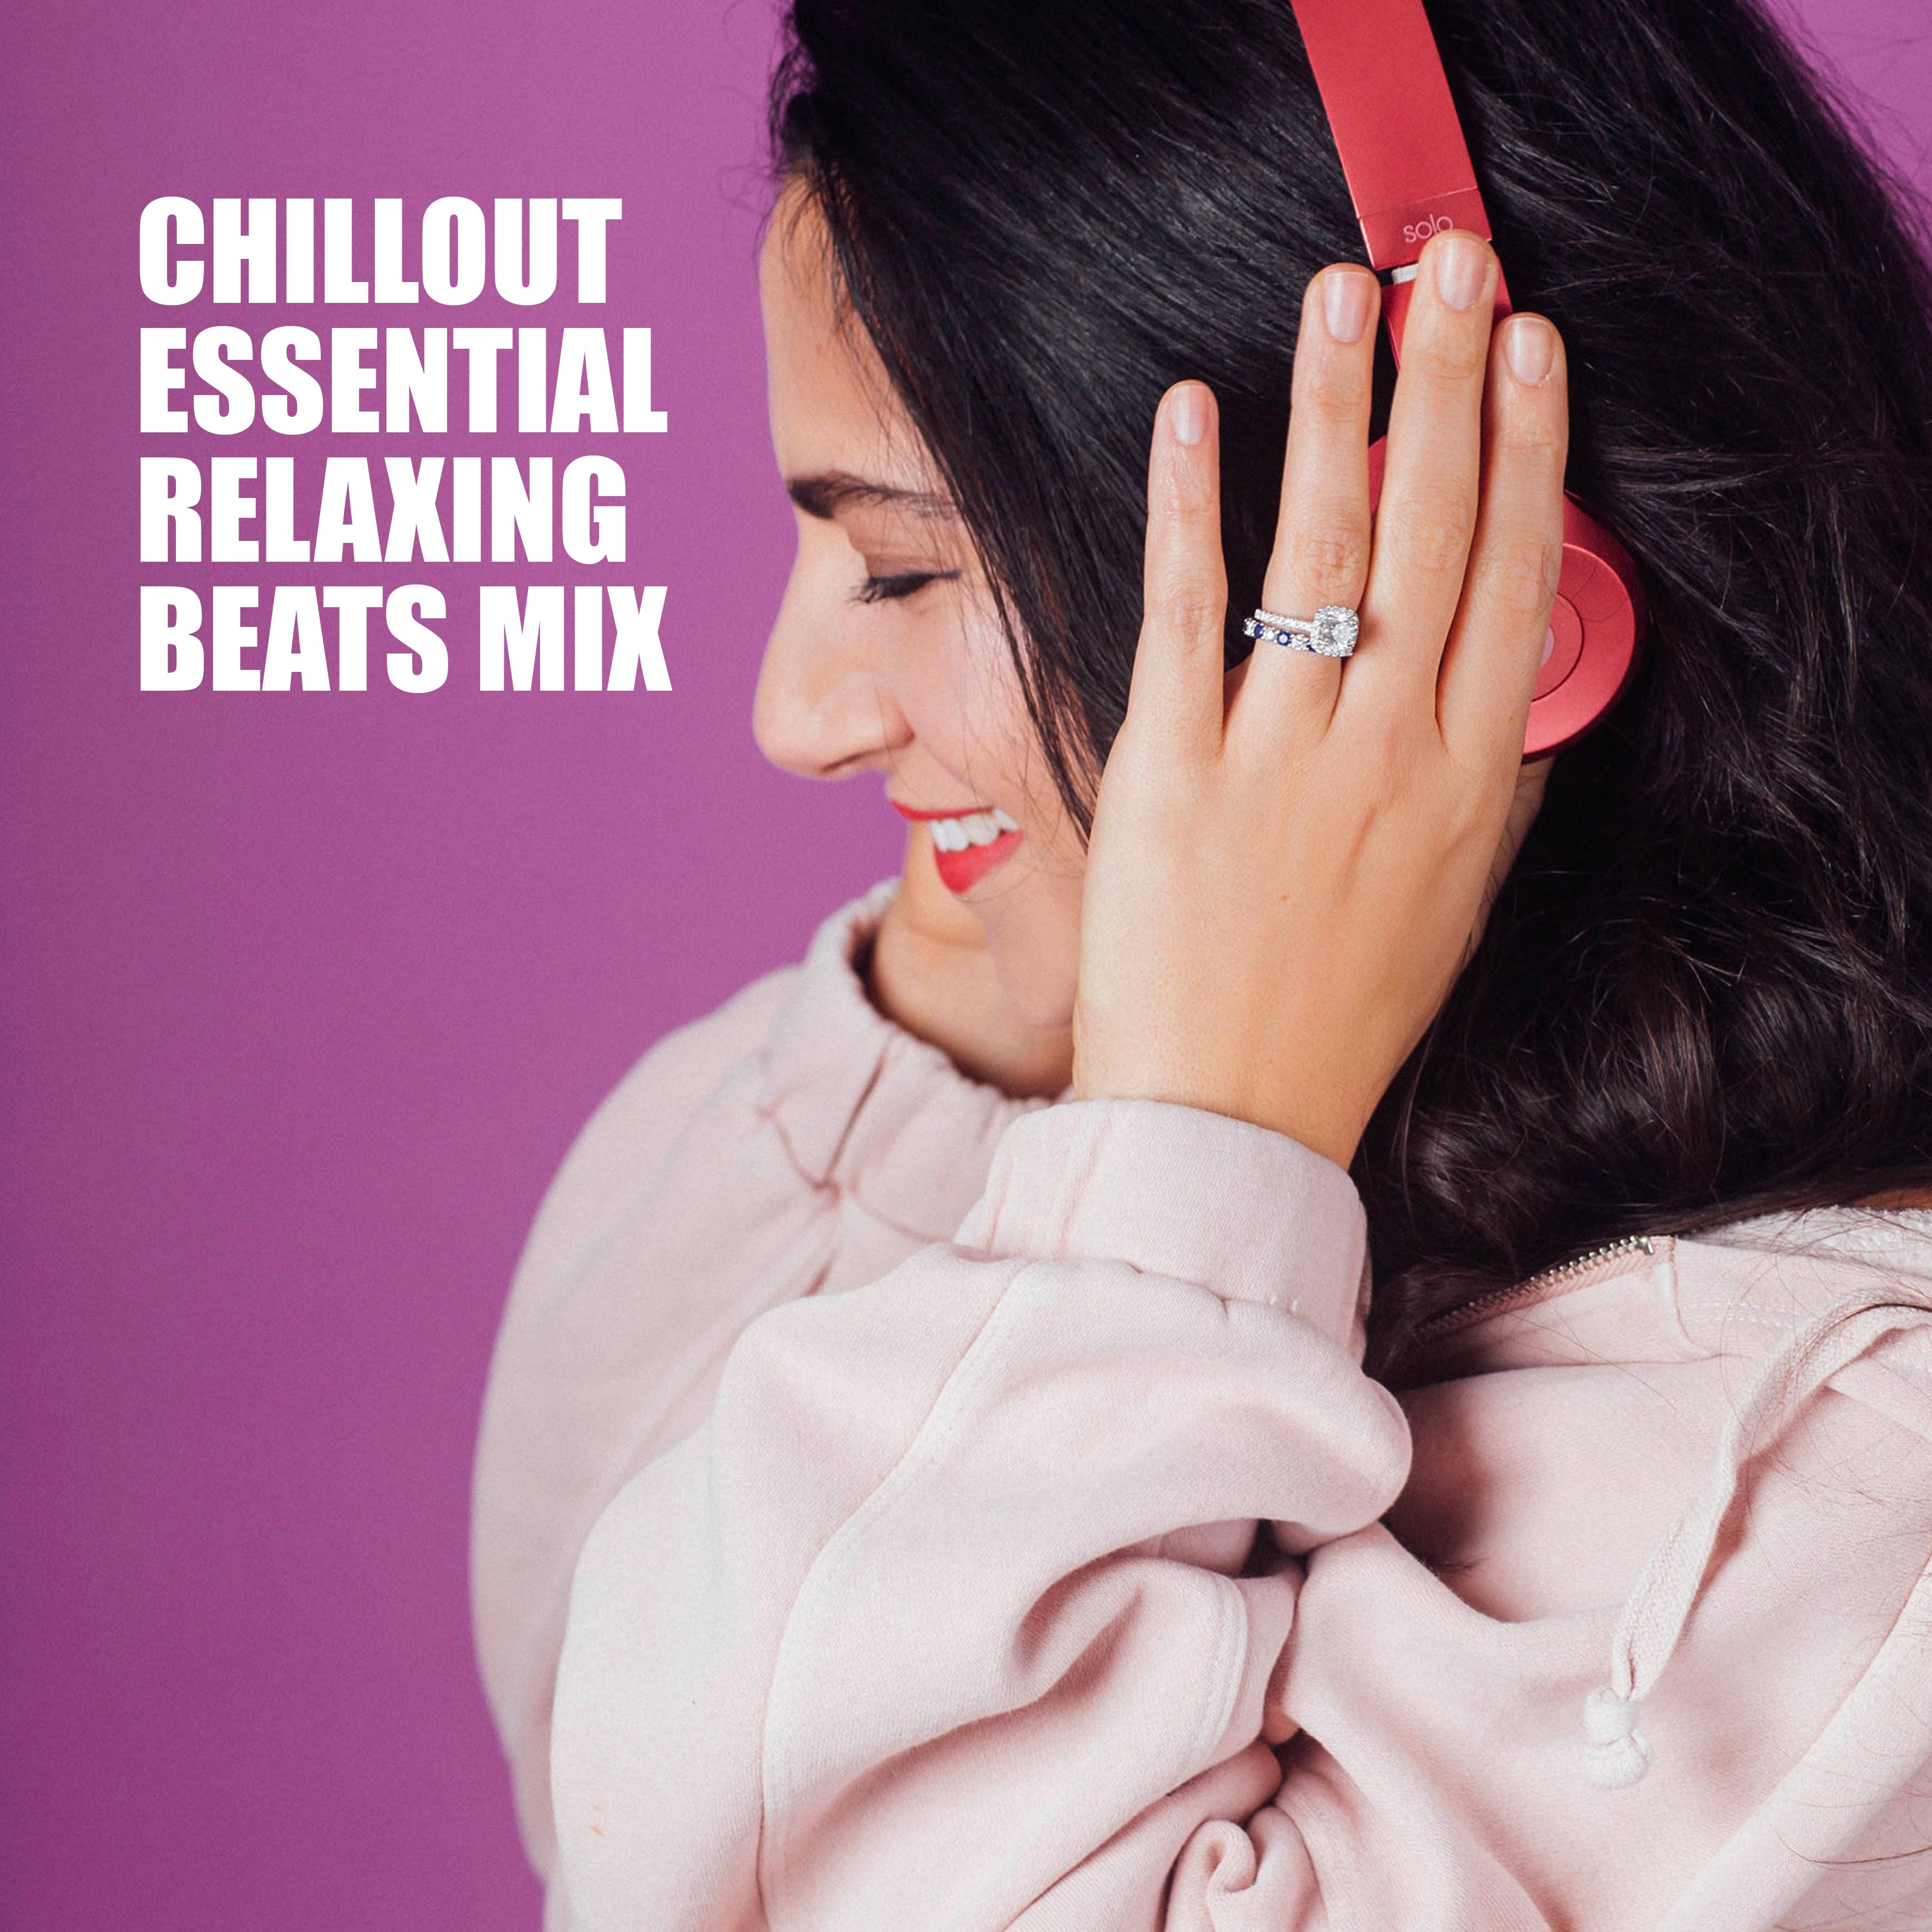 Chillout Essential Relaxing Beats Mix – Chill Out Compilation of 15 Perfect Relaxing Songs for Total Calming Down, Stress Relief Music, Cafe Background Sounds